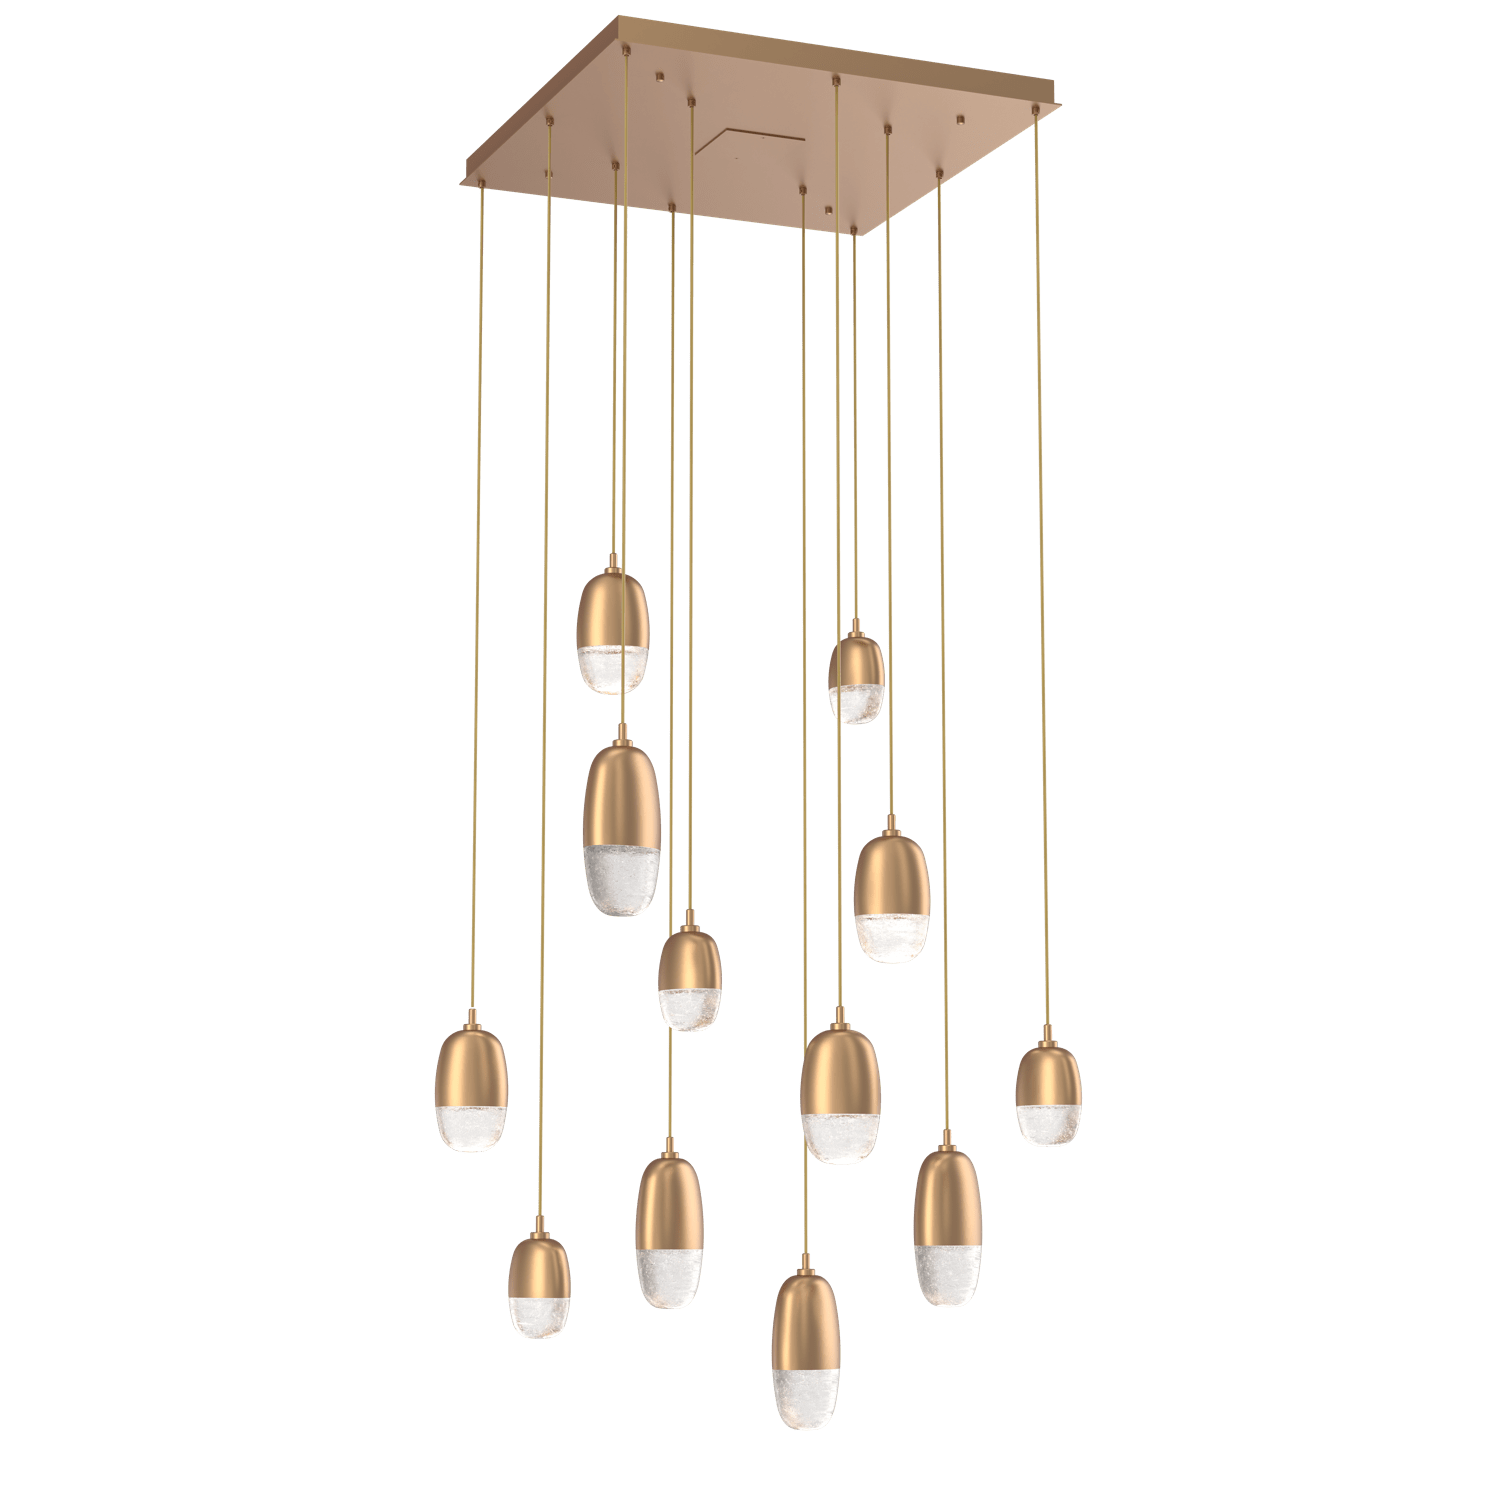 CHB0079-12-NB-Hammerton-Studio-Pebble-12-light-square-pendant-chandelier-with-novel-brass-finish-and-clear-cast-glass-shades-and-LED-lamping